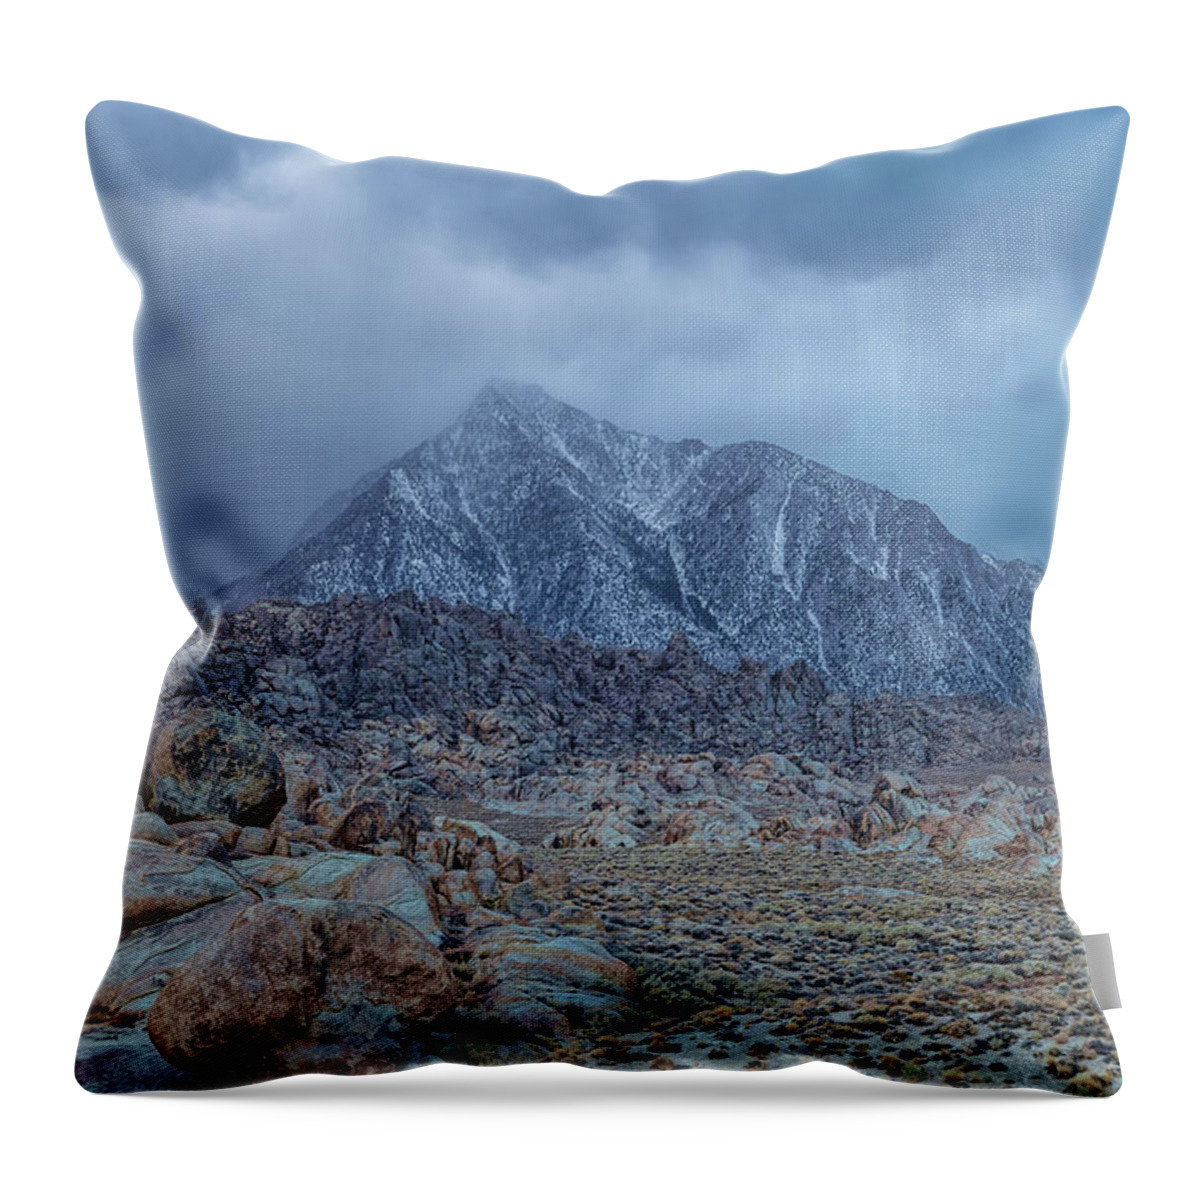 Landscape Throw Pillow featuring the photograph Mysterious by Jonathan Nguyen